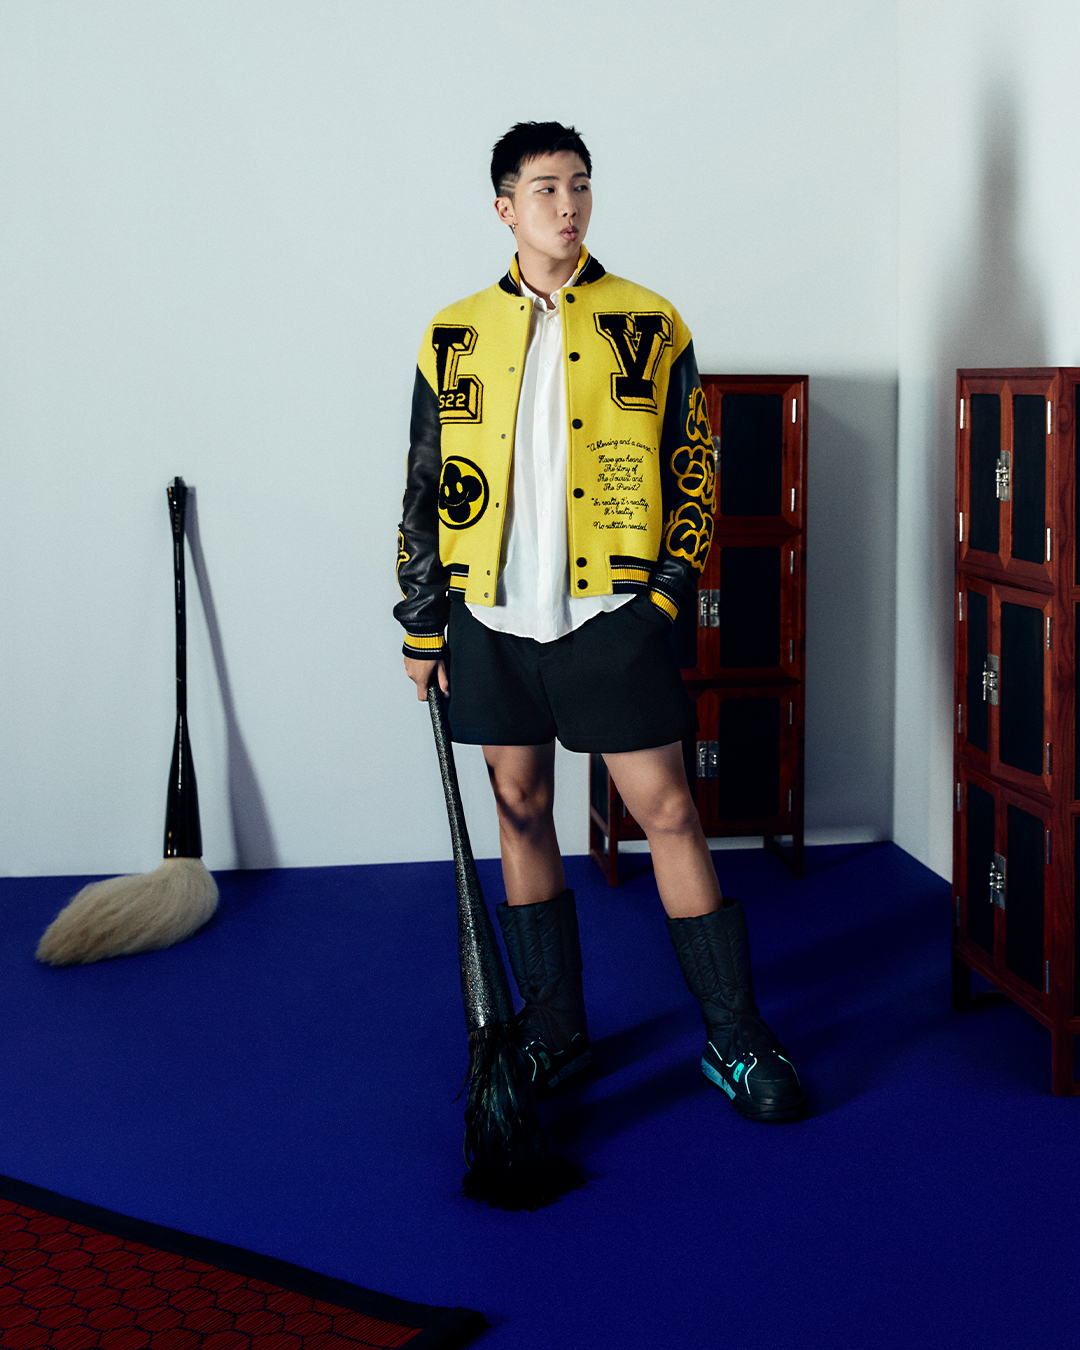 Louis Vuitton on X: #RM in #LVMenSS22. The @bts_twt member and